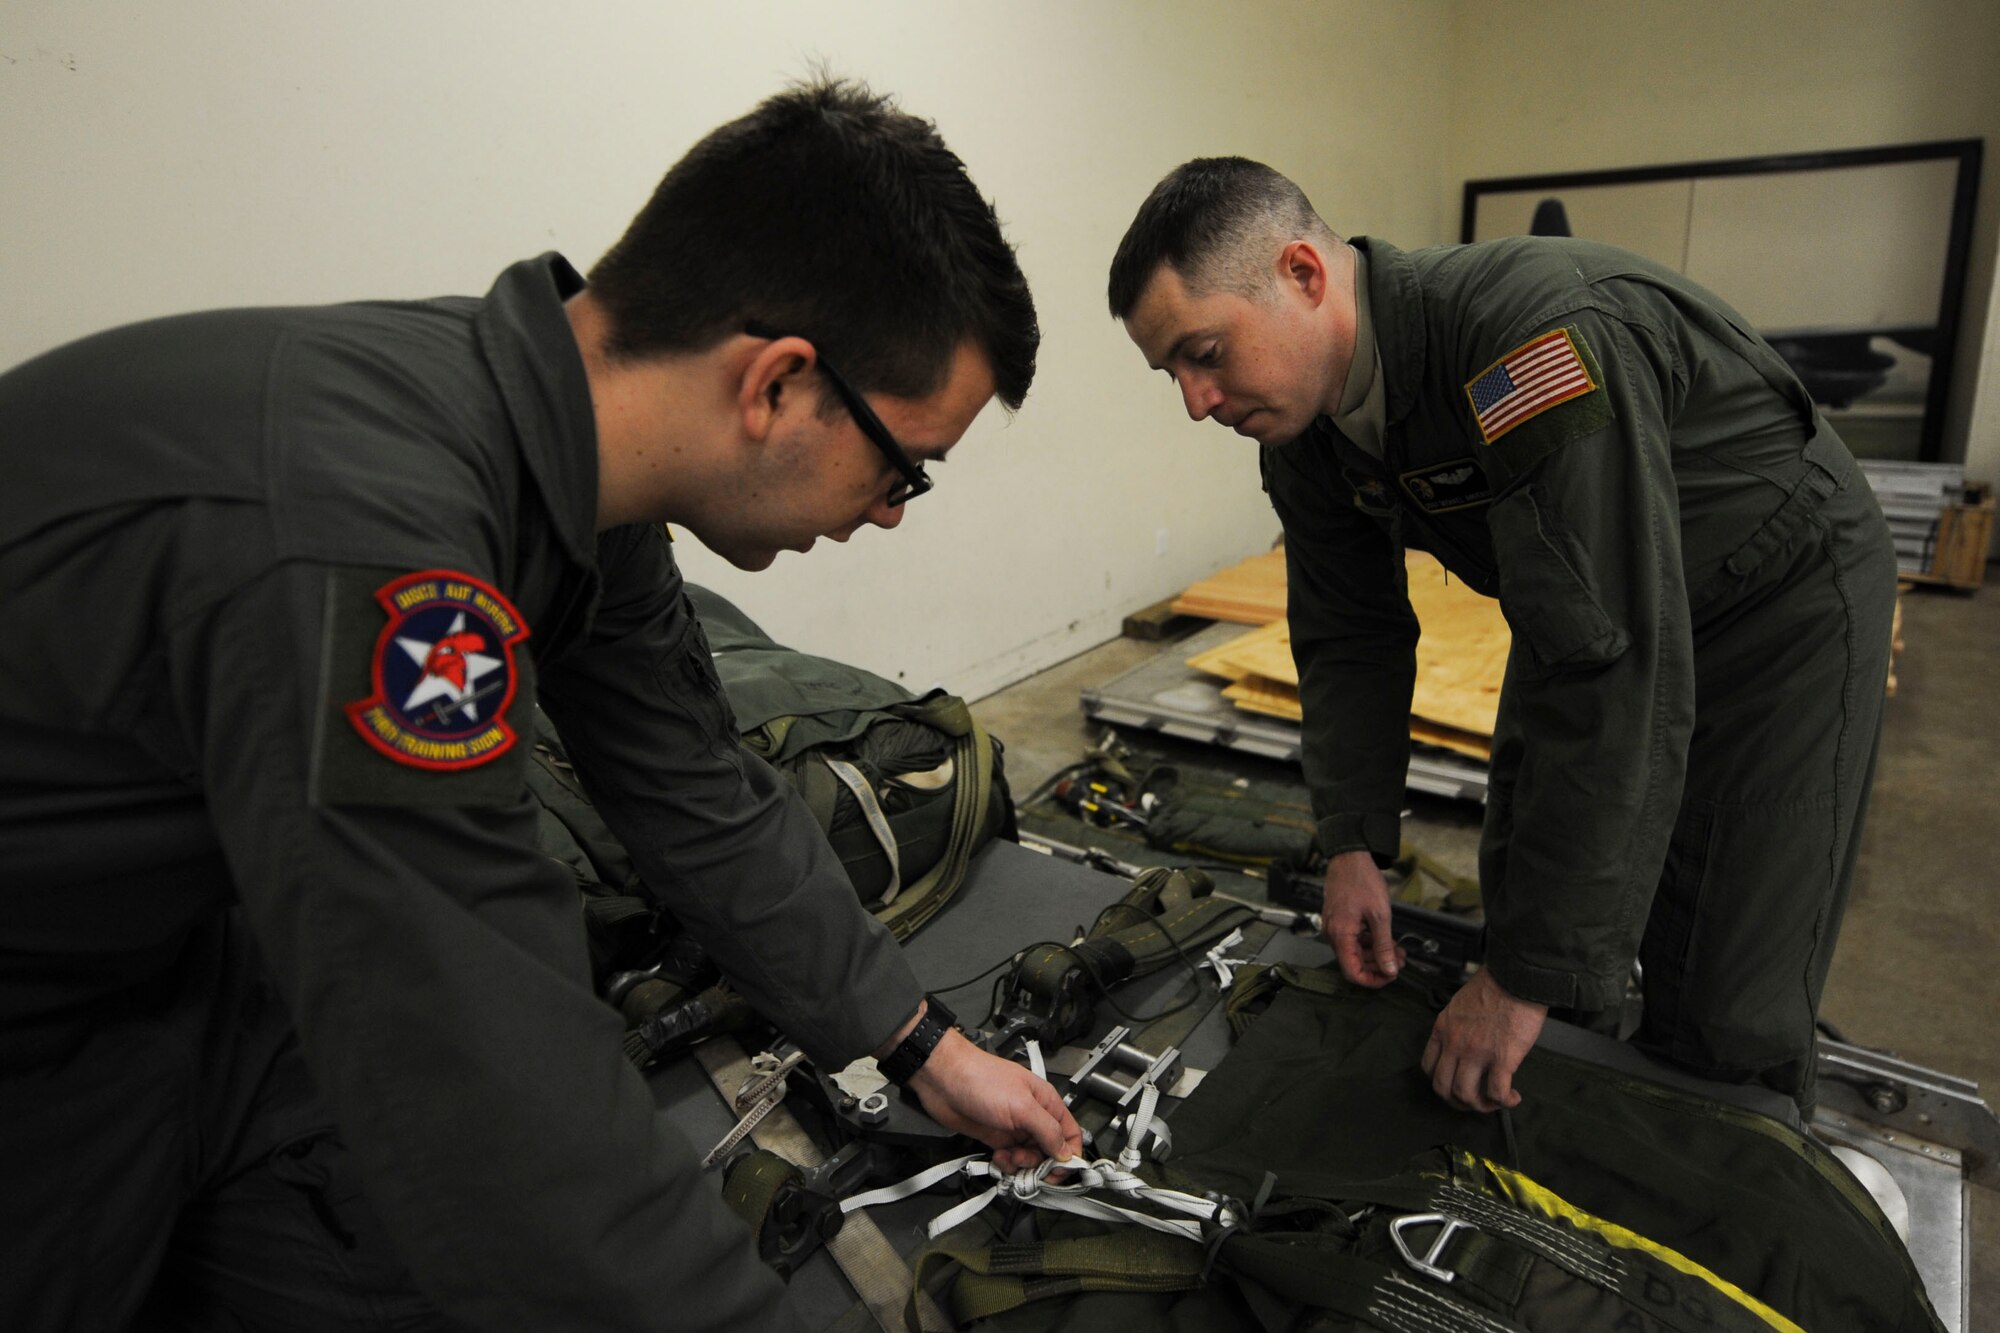 (From right) U.S. Air Force Staff Sgt. Michael Anderson, 48th Airlift Squadron non-commissioned officer in charge of information operations and C-130 formal training unit loadmaster instructor, teaches U.S. Air Force Airman 1st Class Garrett Cornett, a 714th Training Squadron loadmaster student, how to properly secure cargo Jan. 27, 2016, at Little Rock Air Force Base, Ark. While completing all the required training needed to instruct in the C-130J formal training unit, Anderson identified errors in asset accountability preparation for the upcoming unit evaluation inspection. (U.S. Air Force photo by Airman 1st Class Mercedes Taylor) 